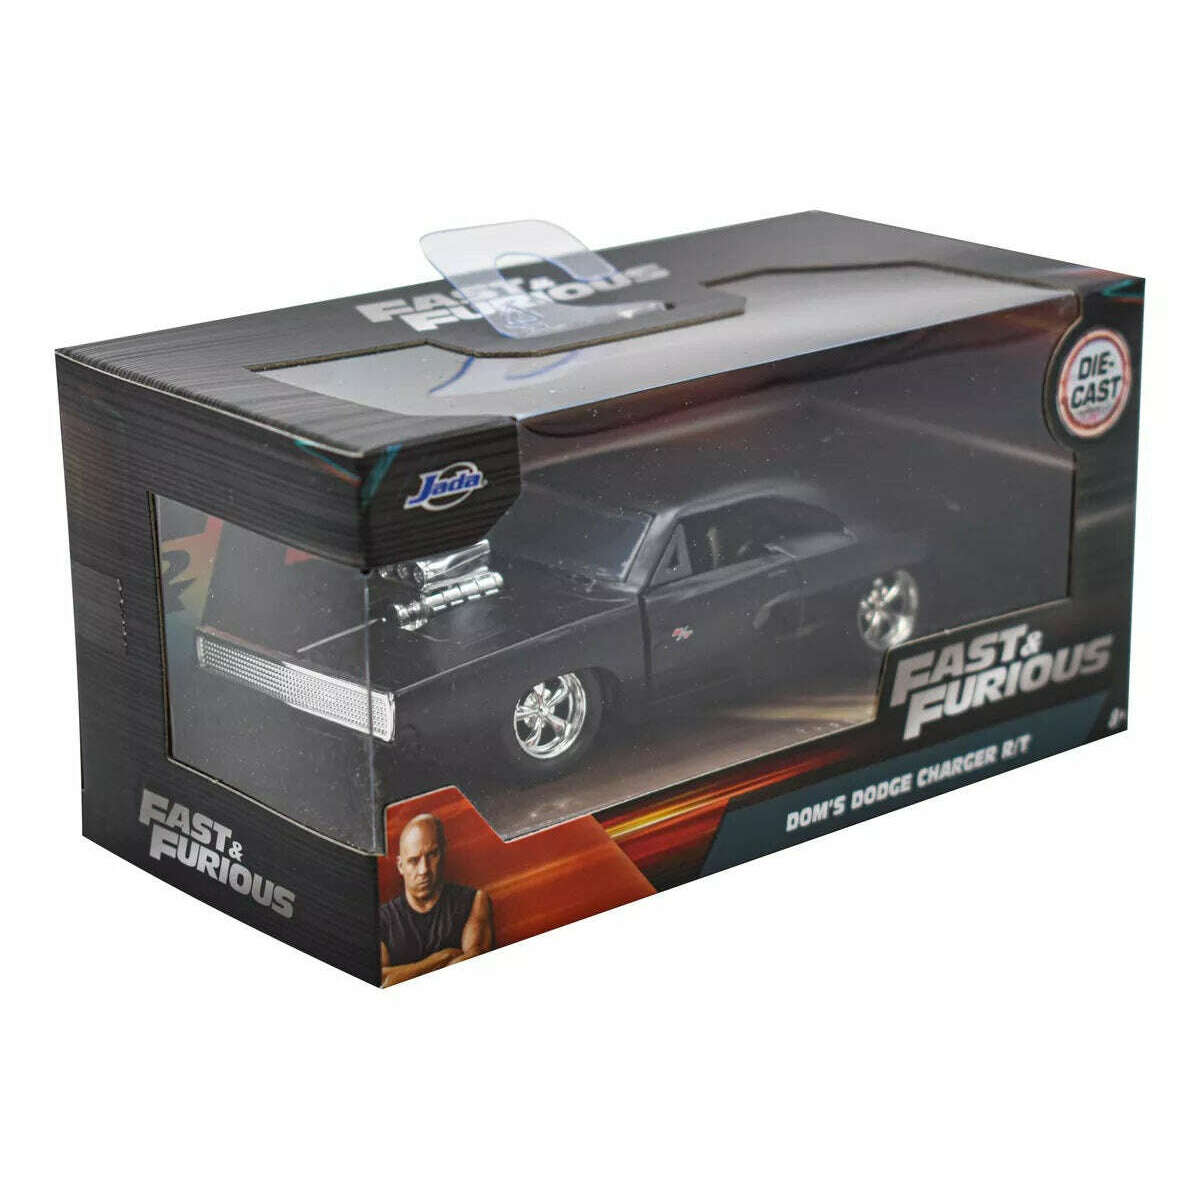 Toys N Tuck:Jada Fast & Furious 1:32 Die Cast Dom's Dodge Charger R/T,Fast